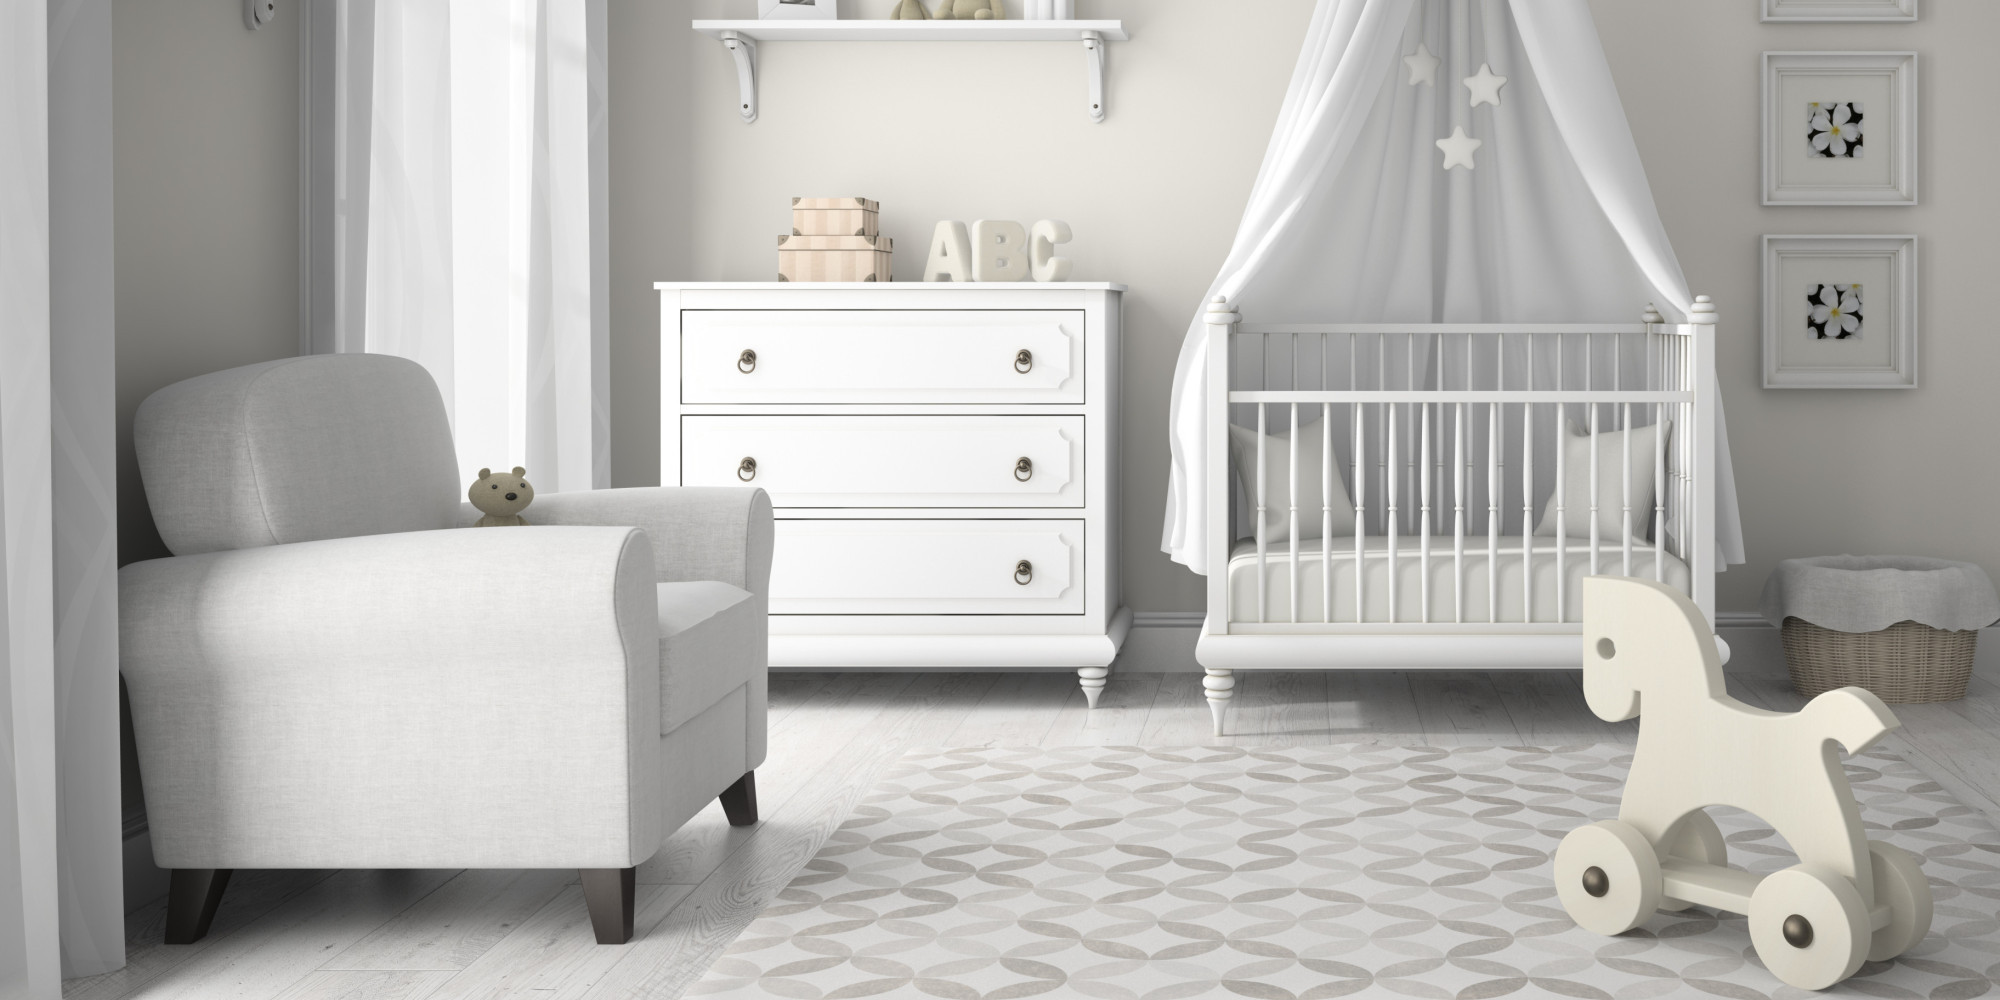 Decorating Baby Room
 How To Decorate Your Baby s Nursery In A Day